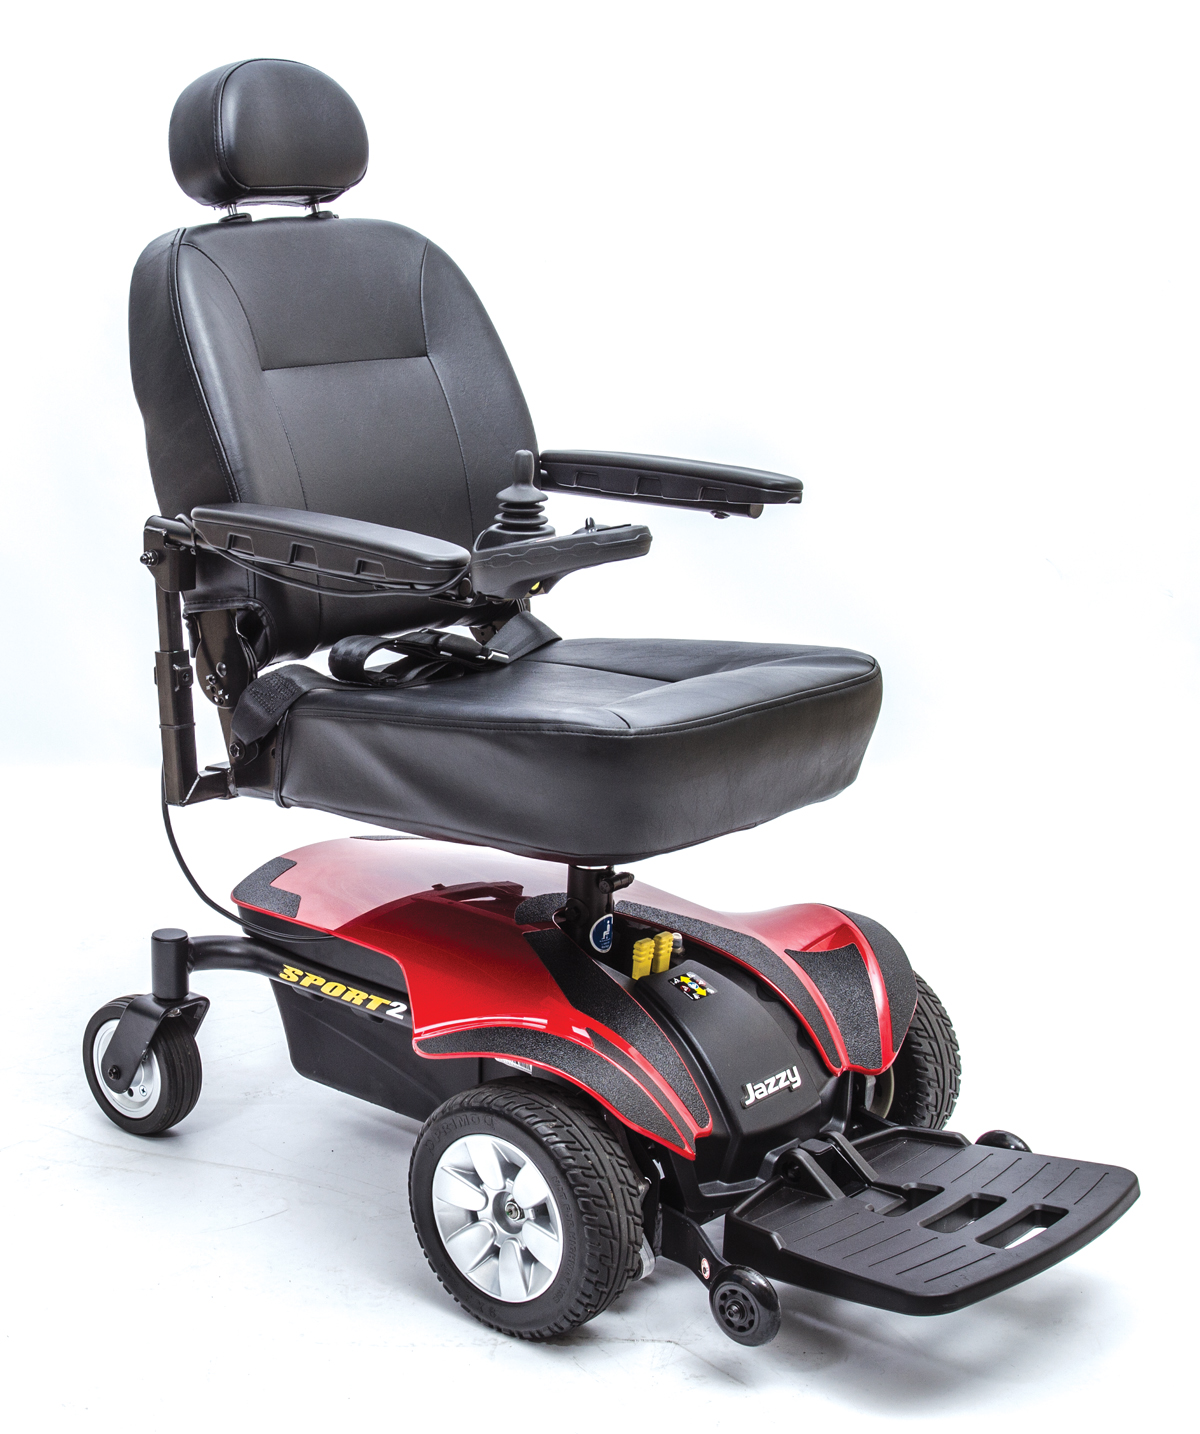 Active Medical & Mobility | Home Medical Equipment, Knee Braces, Mobility Scooters, Electric Wheelchairs
